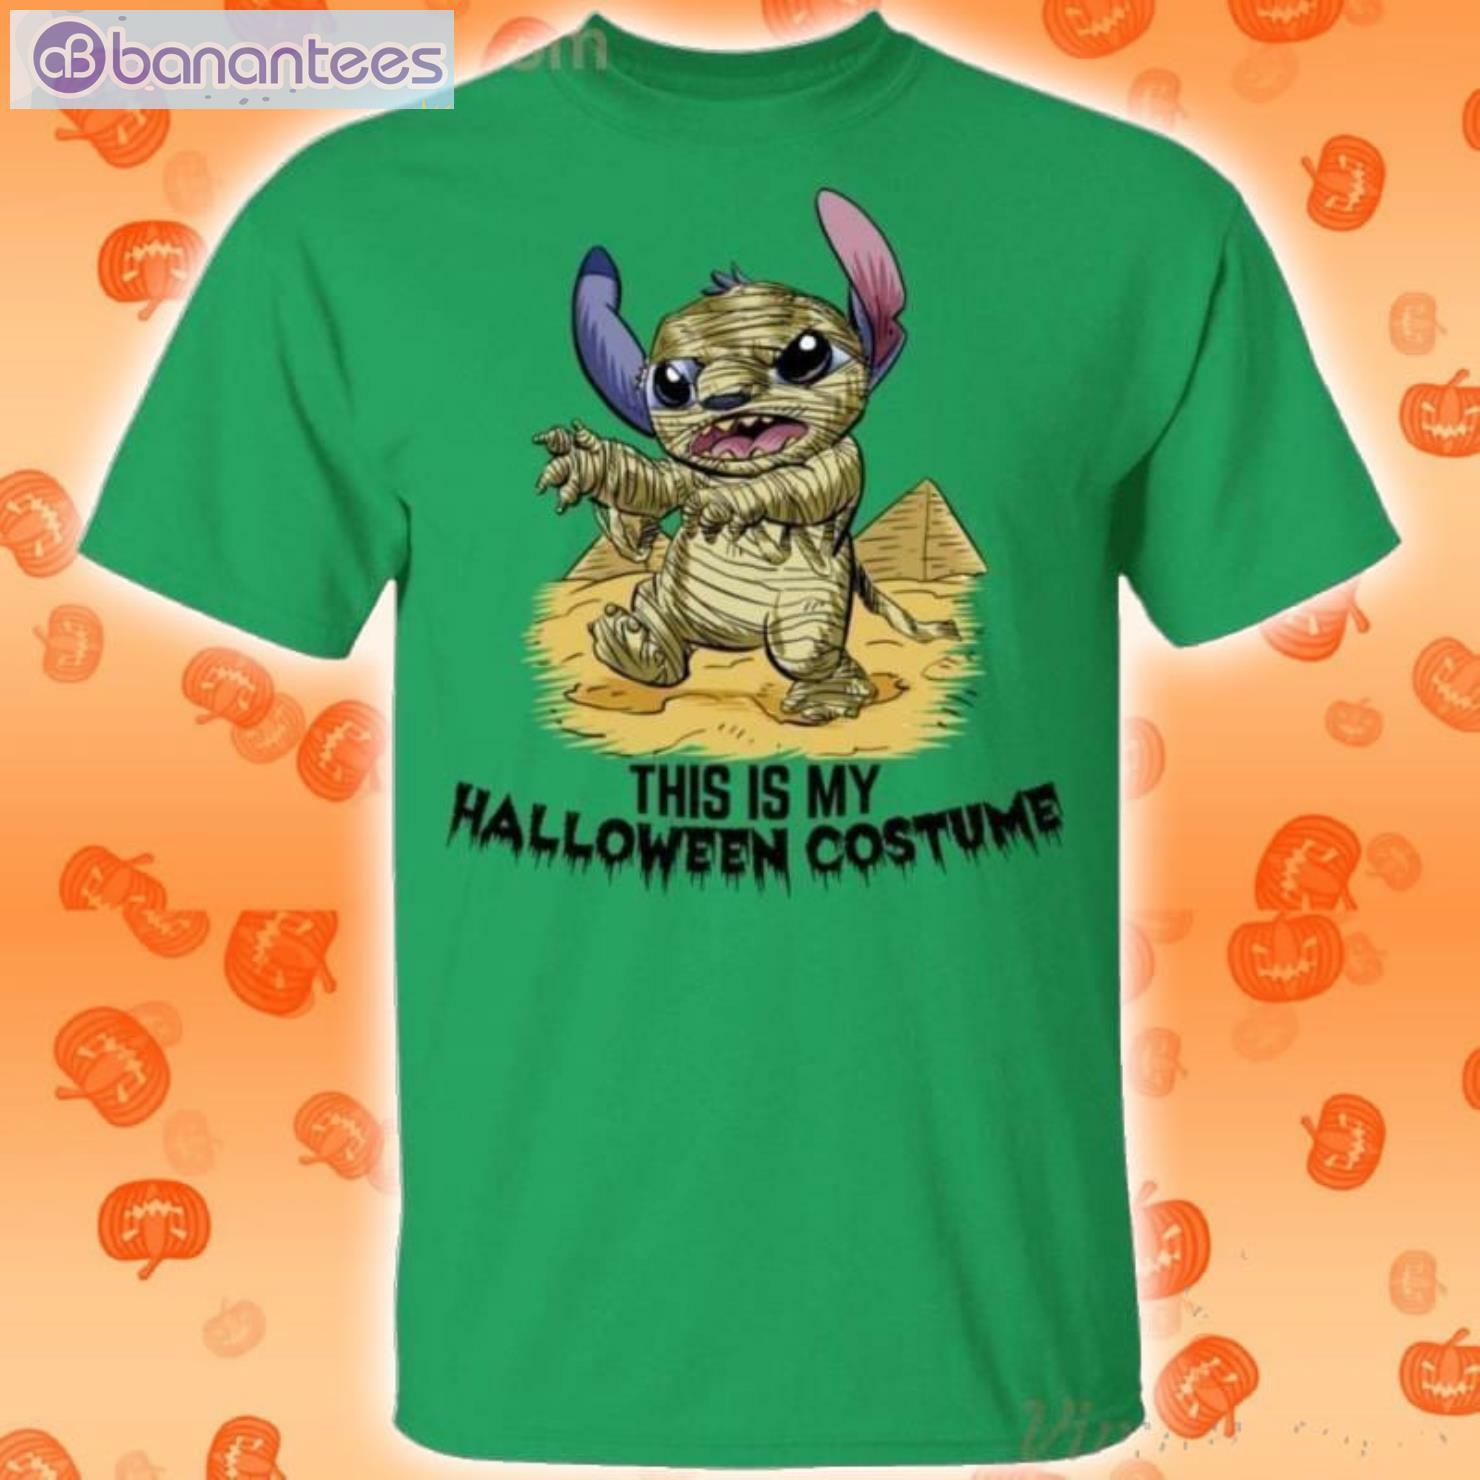 Mummy Stitch This Is My Halloween Kids Funny T-Shirt Product Photo 2 Product photo 2